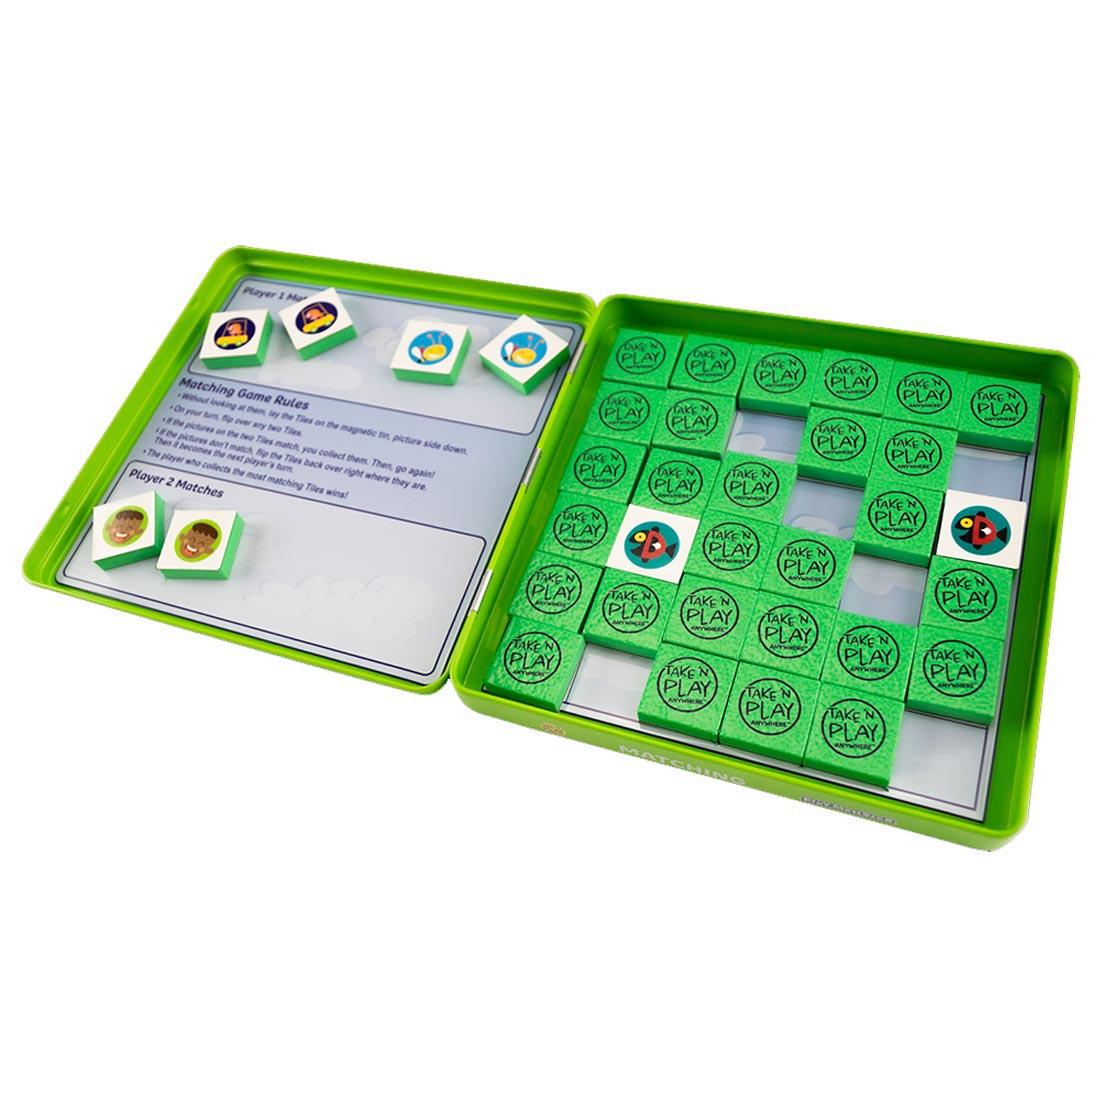 Contents of Matching Take 'N' Play Anywhere Magnetic Game